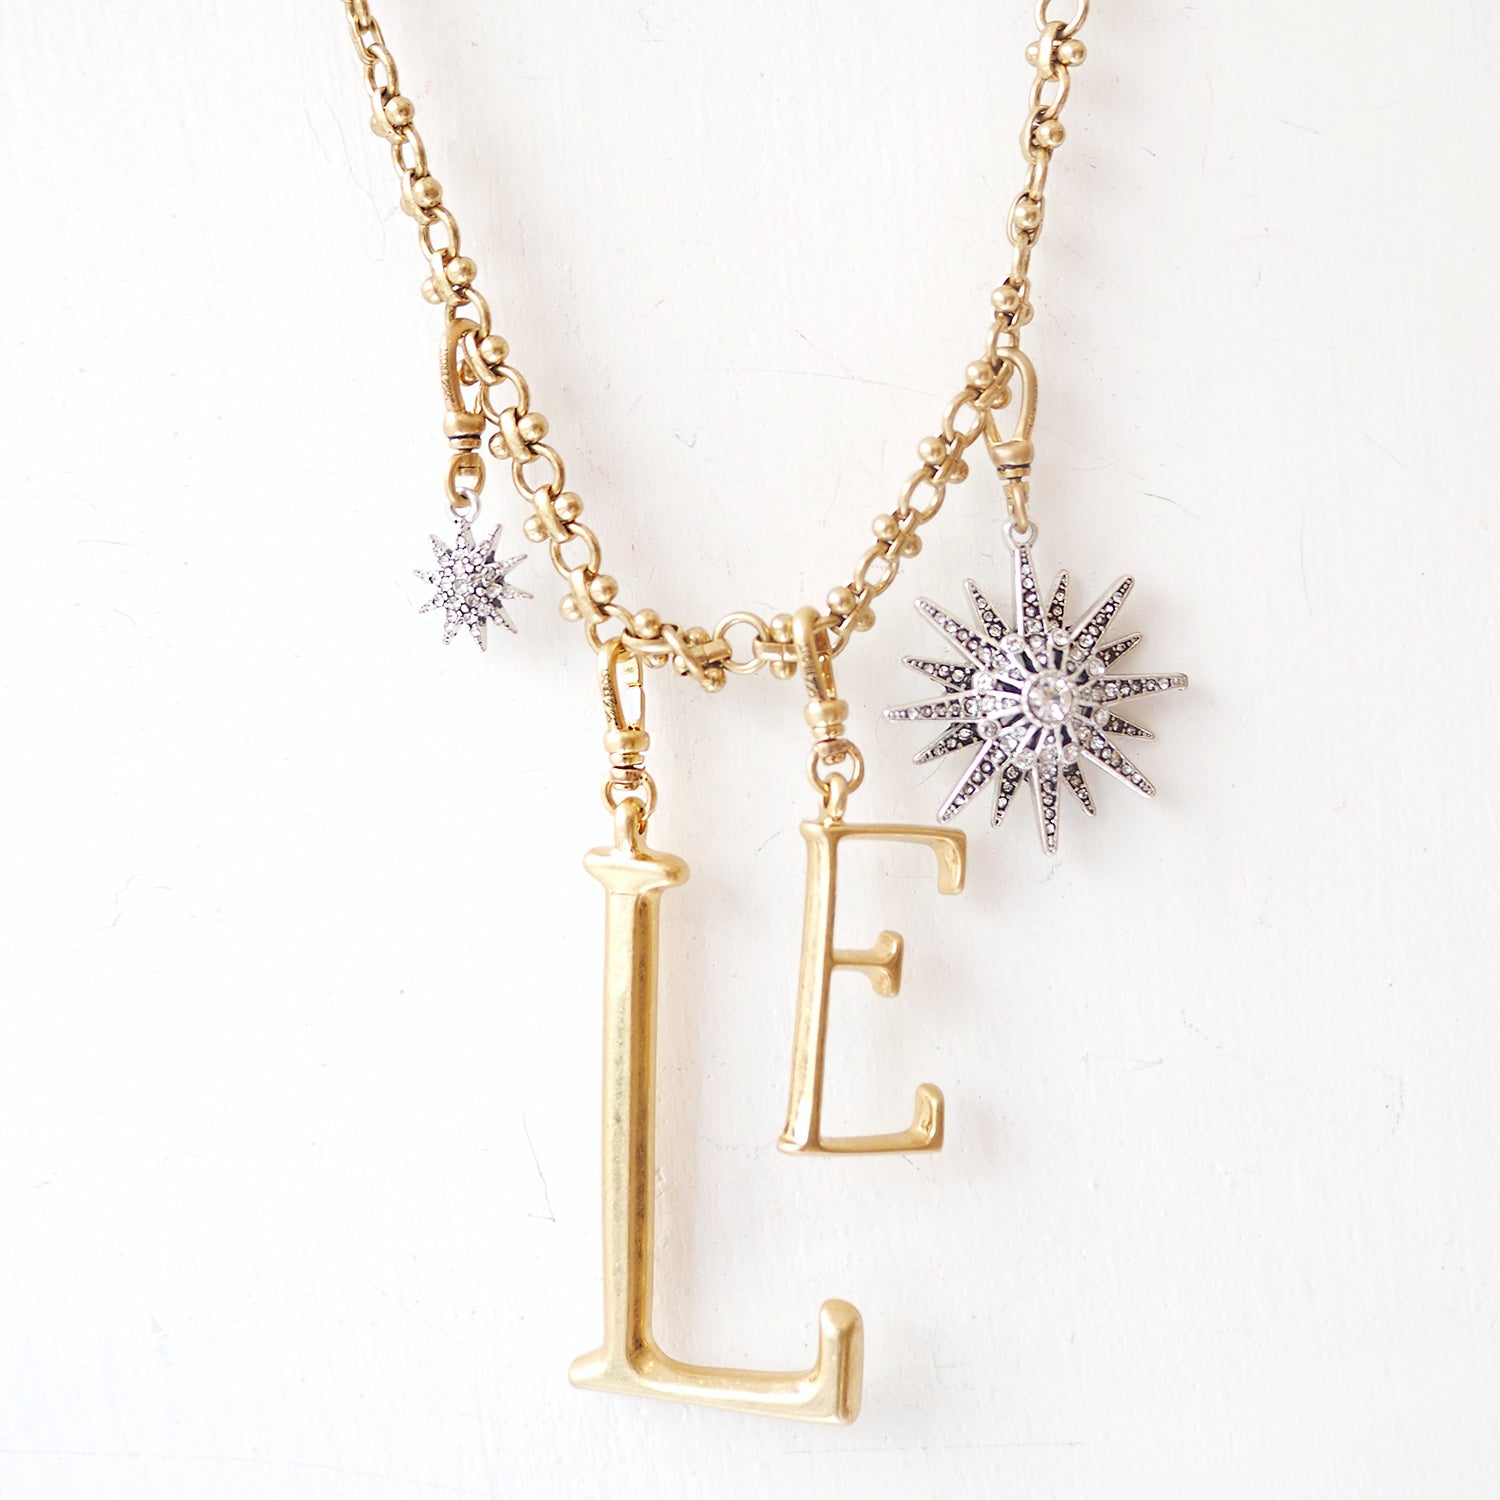 The Lulu Frost radiant charm features an Art Deco-inspired star motif that represents transcendence. Pair with one of the chain bases and add additional charms to create a special piece all your own. 